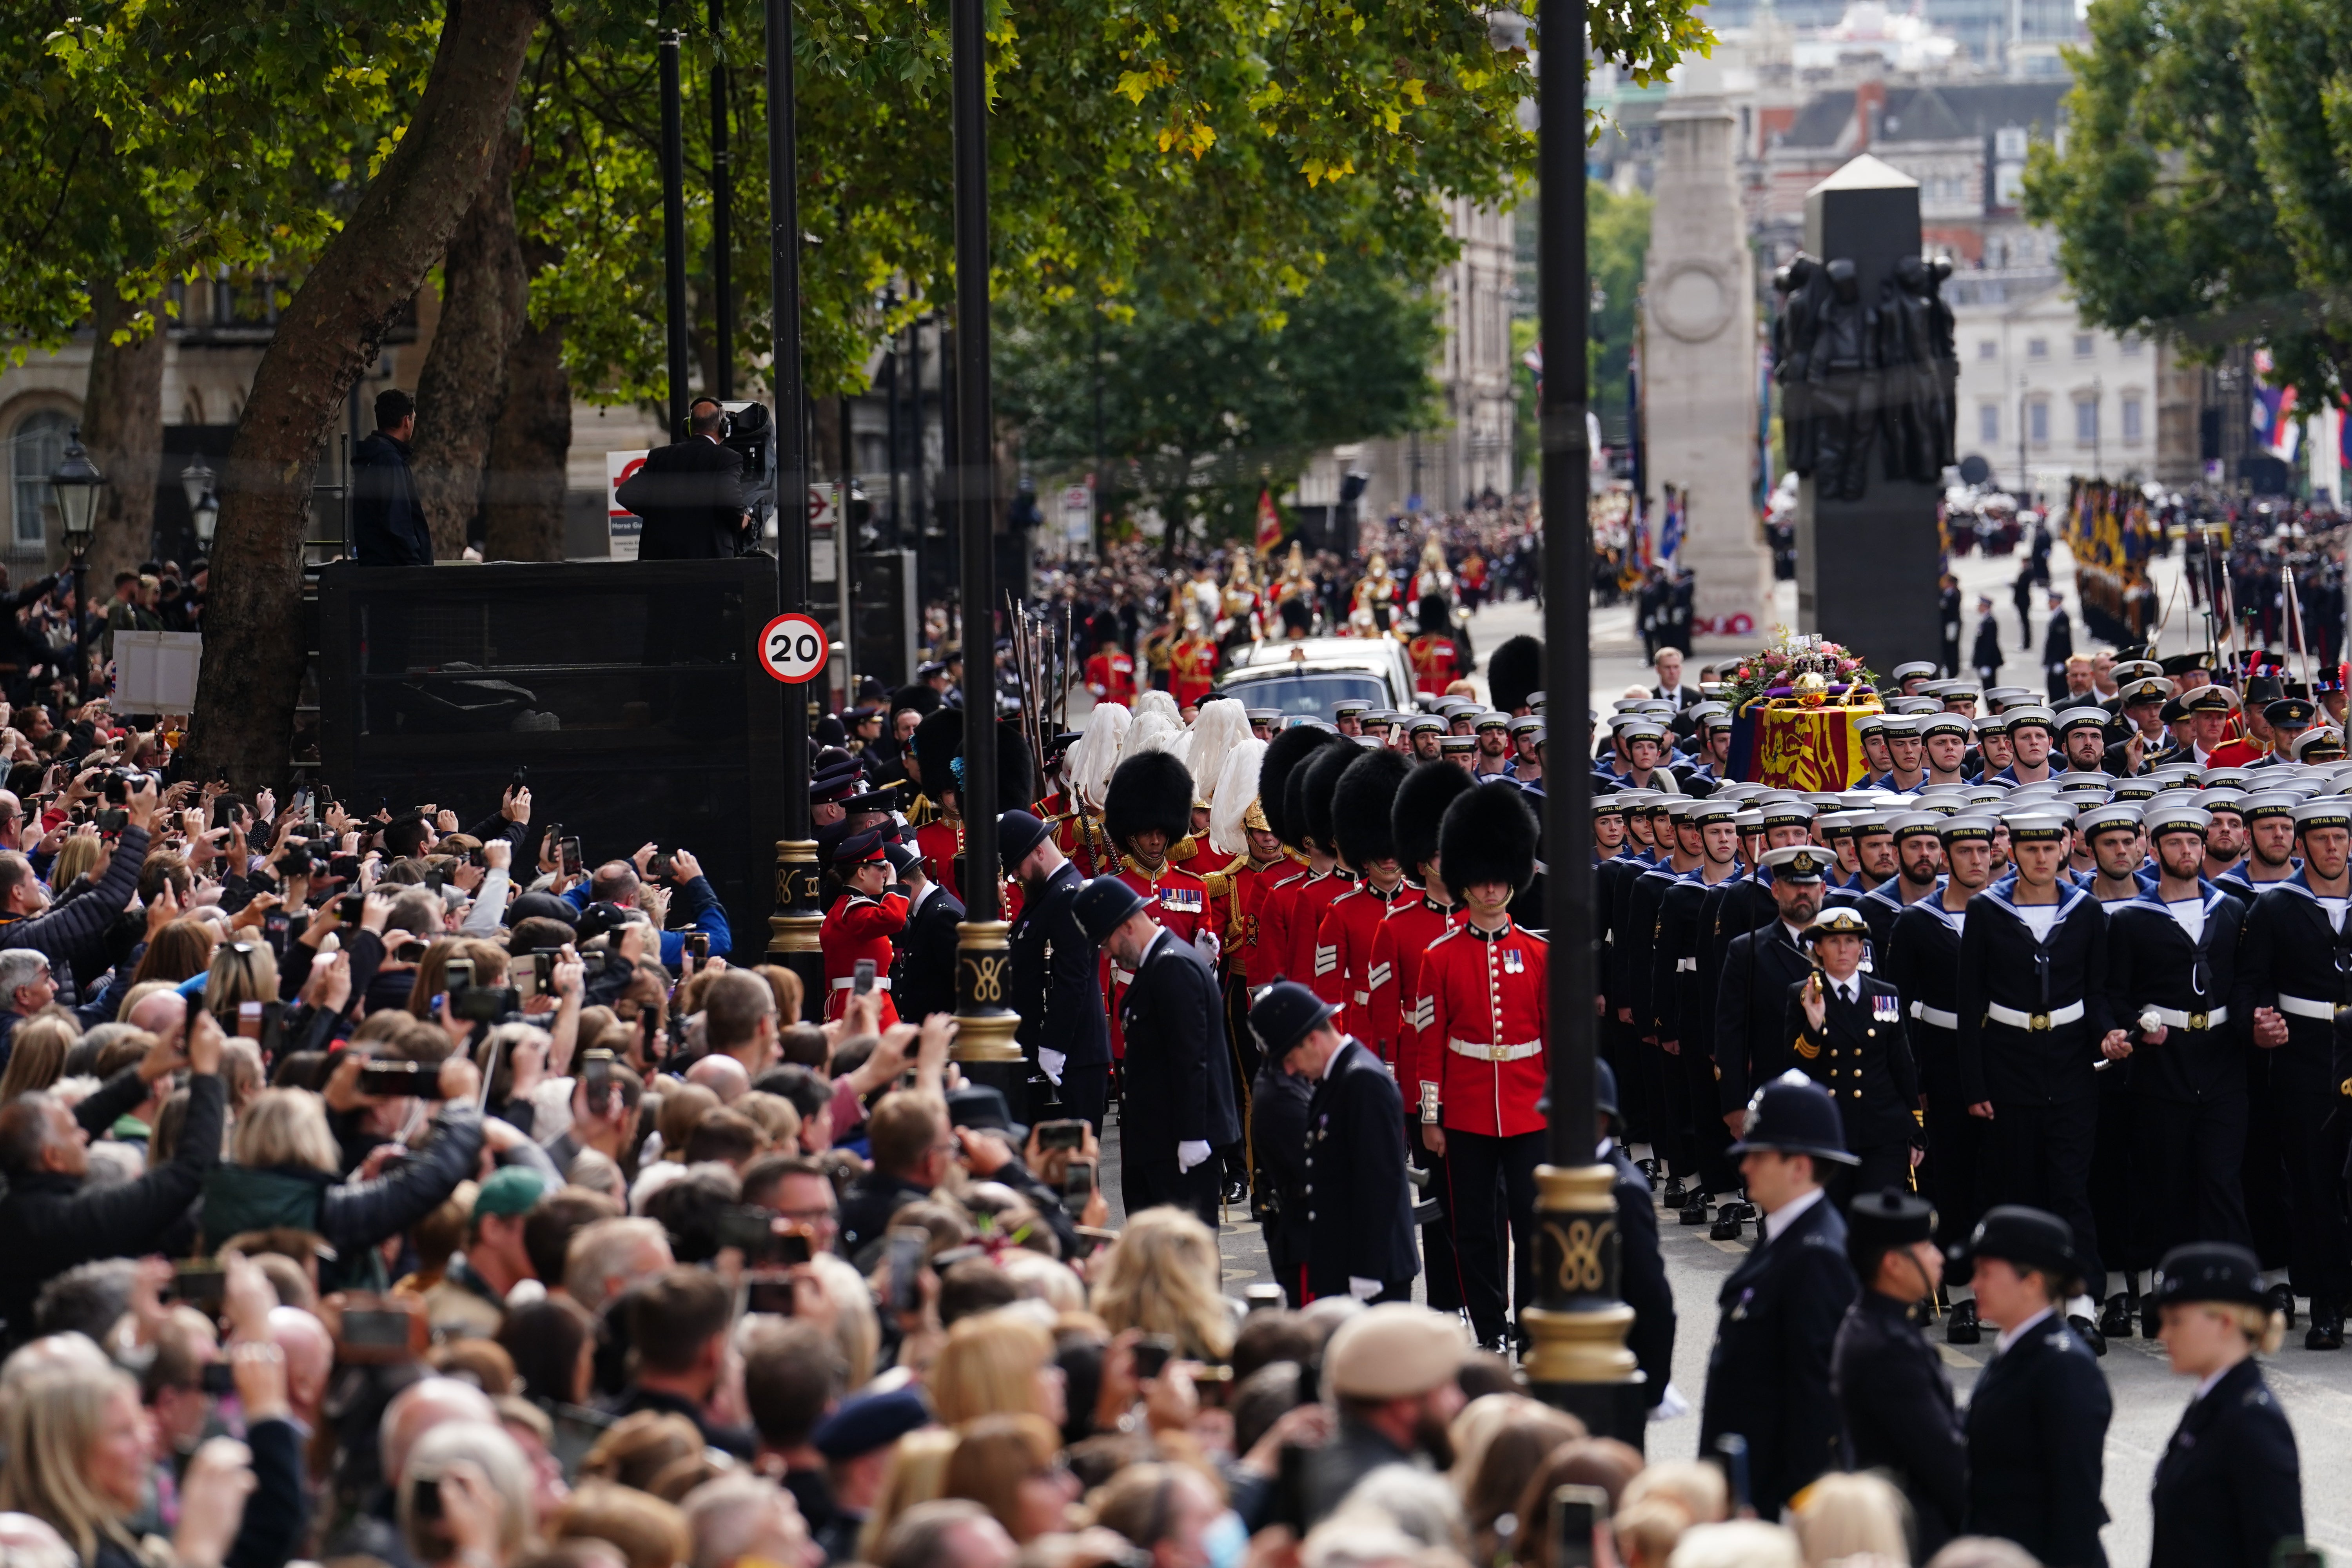 Security operations in the capital were at the highest level as crowds watched the Queen’s funeral procession (David Davies/PA)